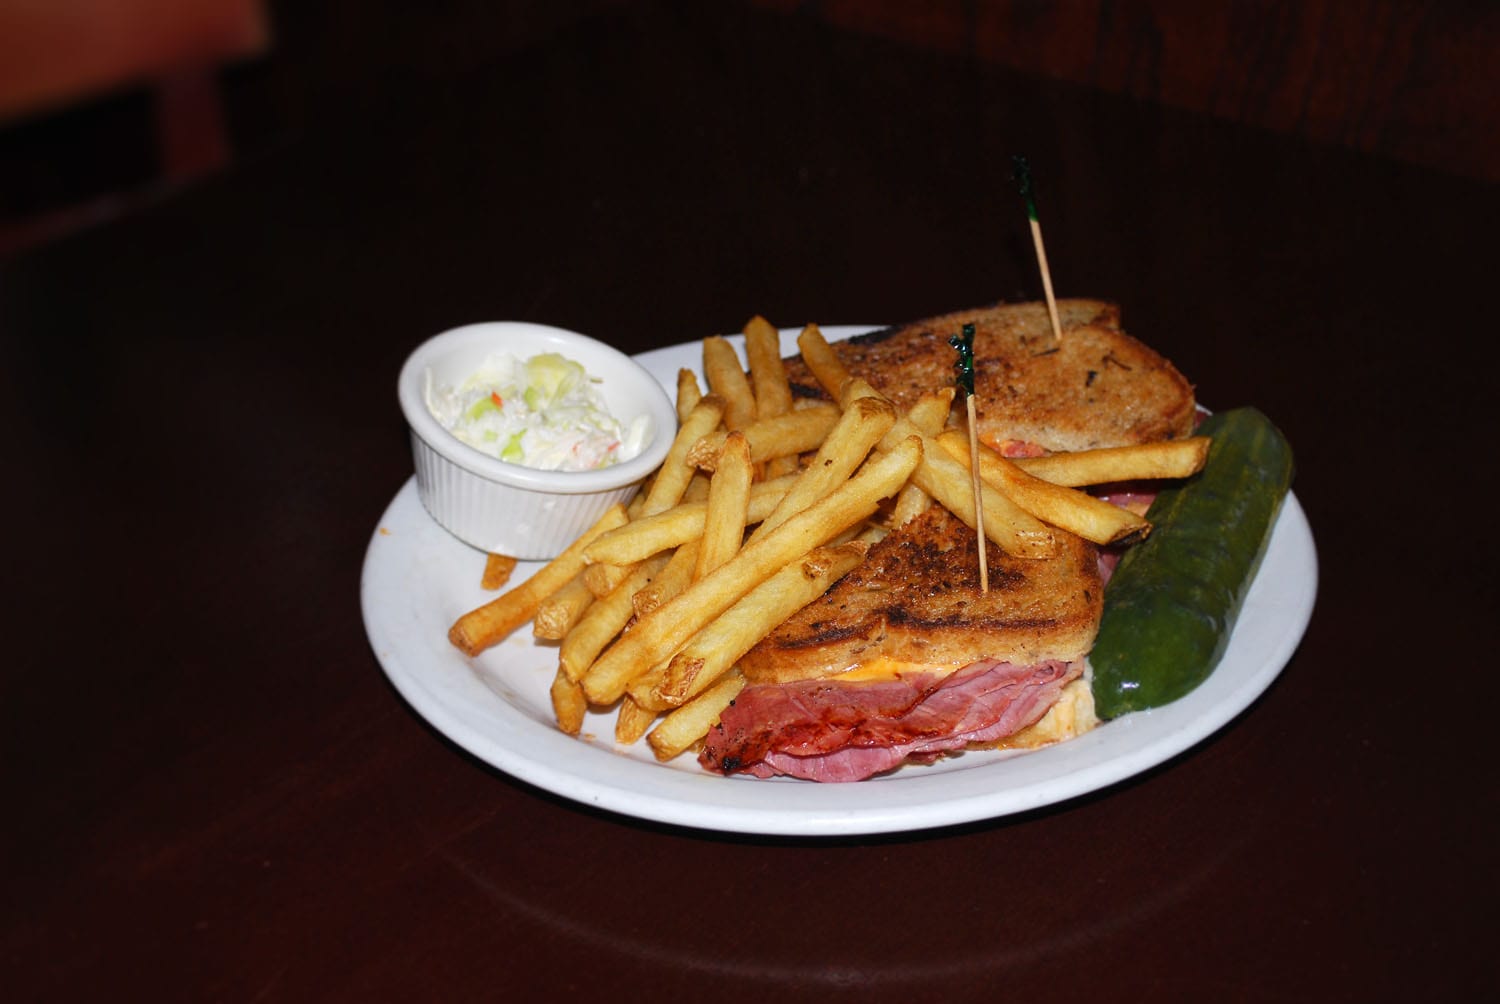 A plate of sandwich and fries